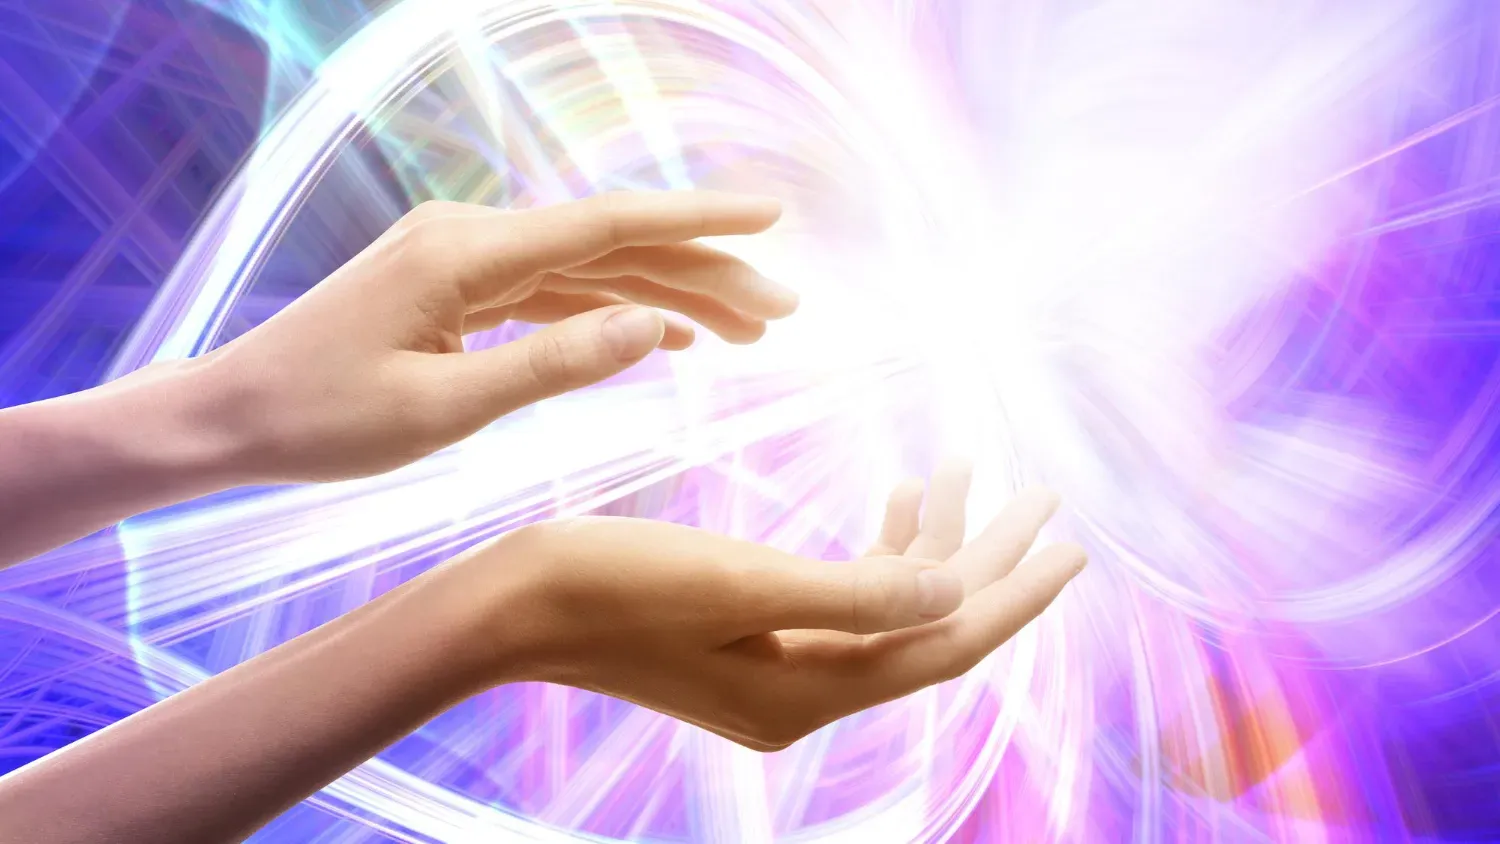 Aura Phenomena Woman With Flows Energy Around Her Hands Against Color Background Closeup